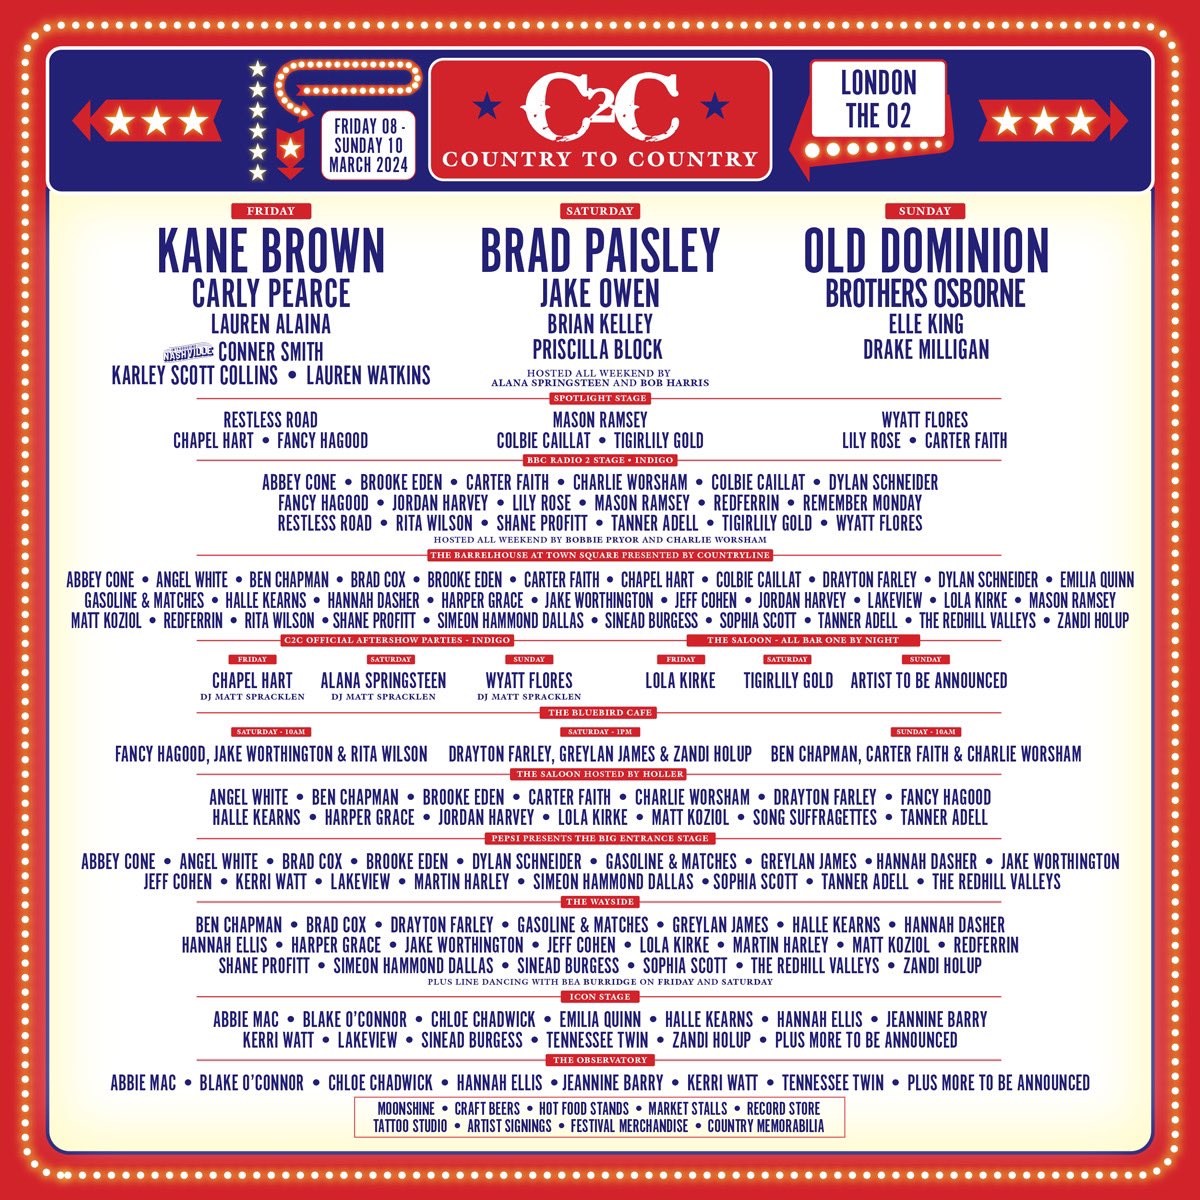 THIS FANCY BOI IS HEADED ACROSS THE POND!!! This is line up is stocked with some of my fav people!! WHOS GONNA BE THERE FOR @C2Cfestival???? 🇬🇧🇬🇧🇬🇧🇬🇧